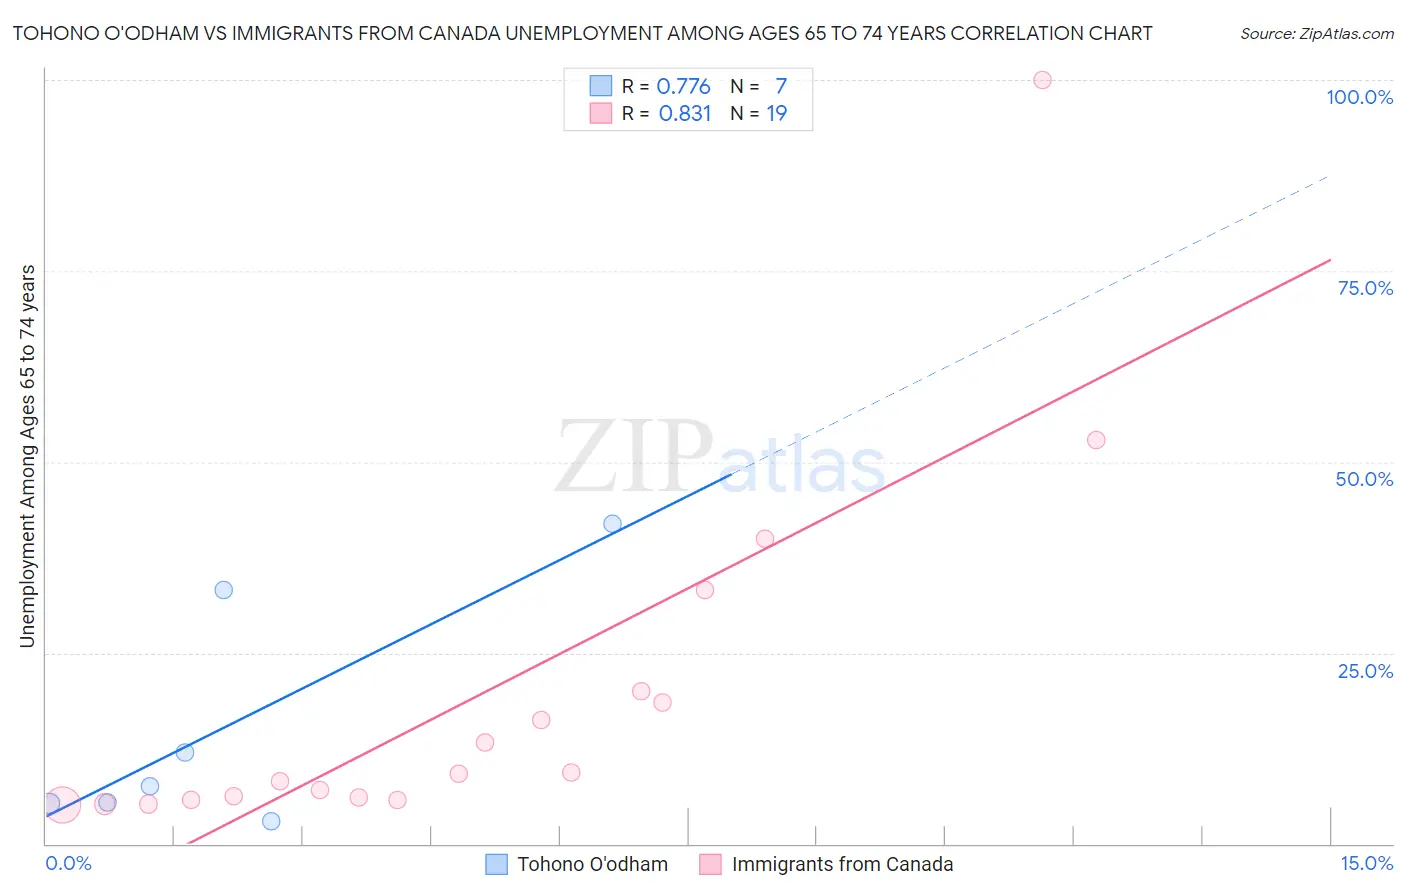 Tohono O'odham vs Immigrants from Canada Unemployment Among Ages 65 to 74 years